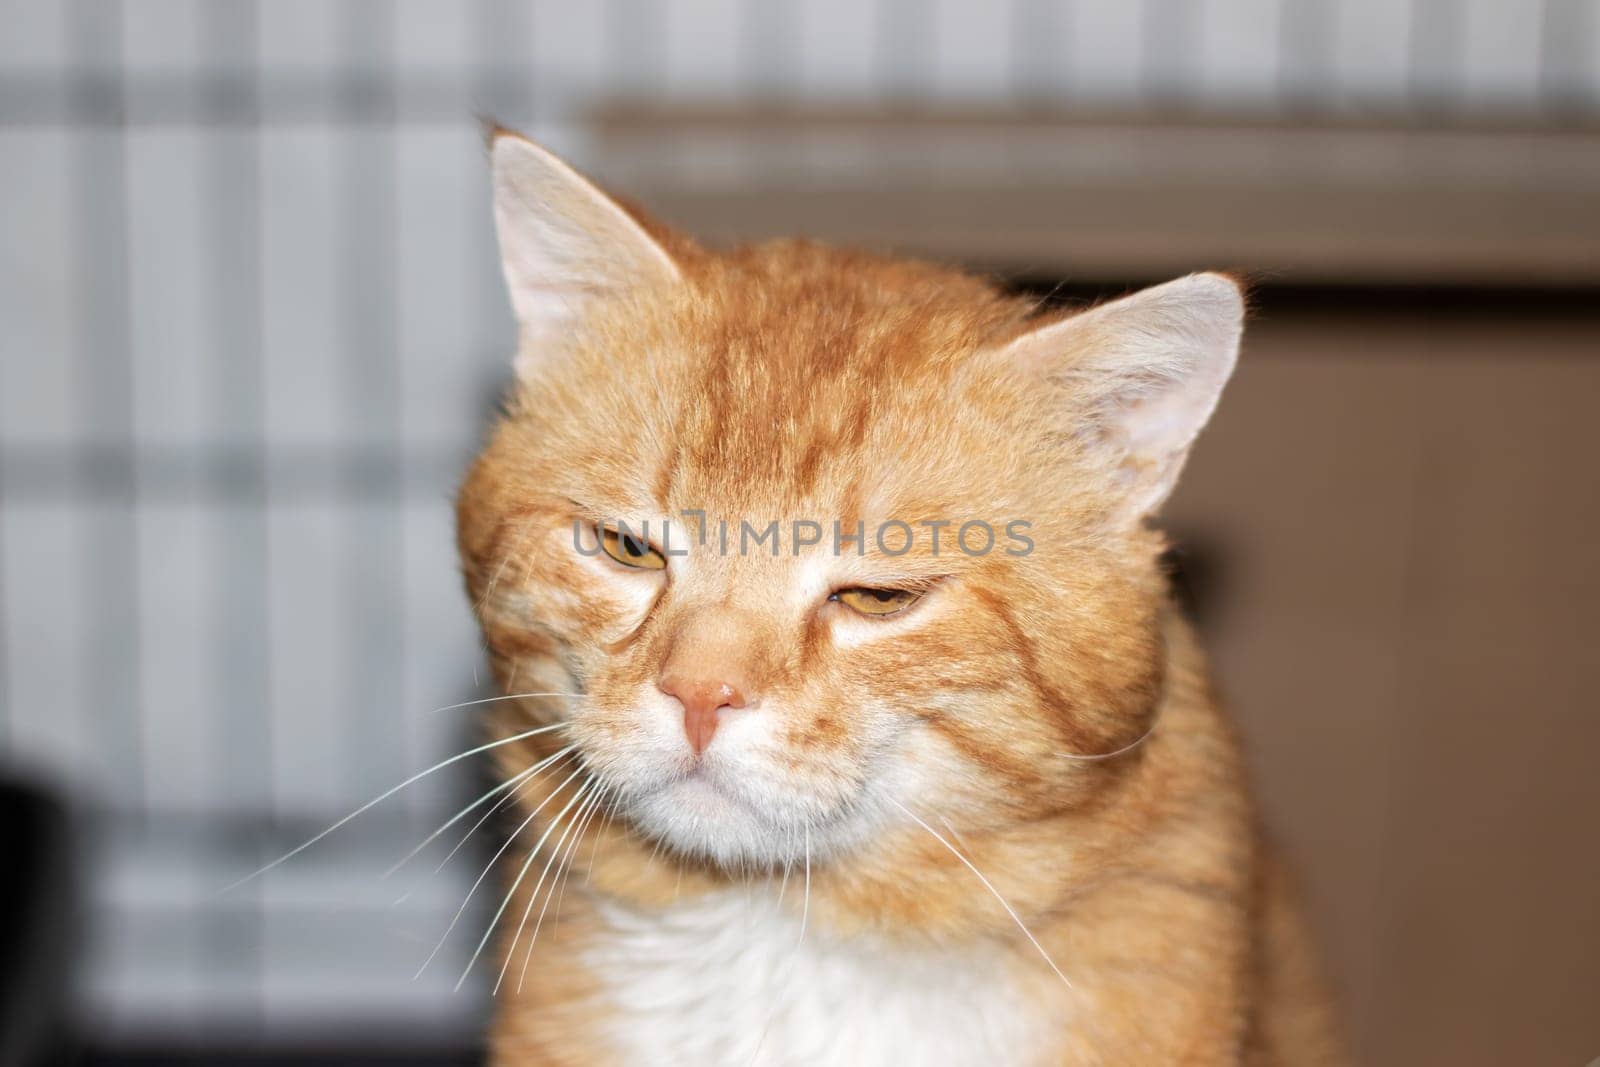 A close up photo showing an orange and white cat staring directly at the camera, displaying its whiskers, fur, and small to mediumsized cat features